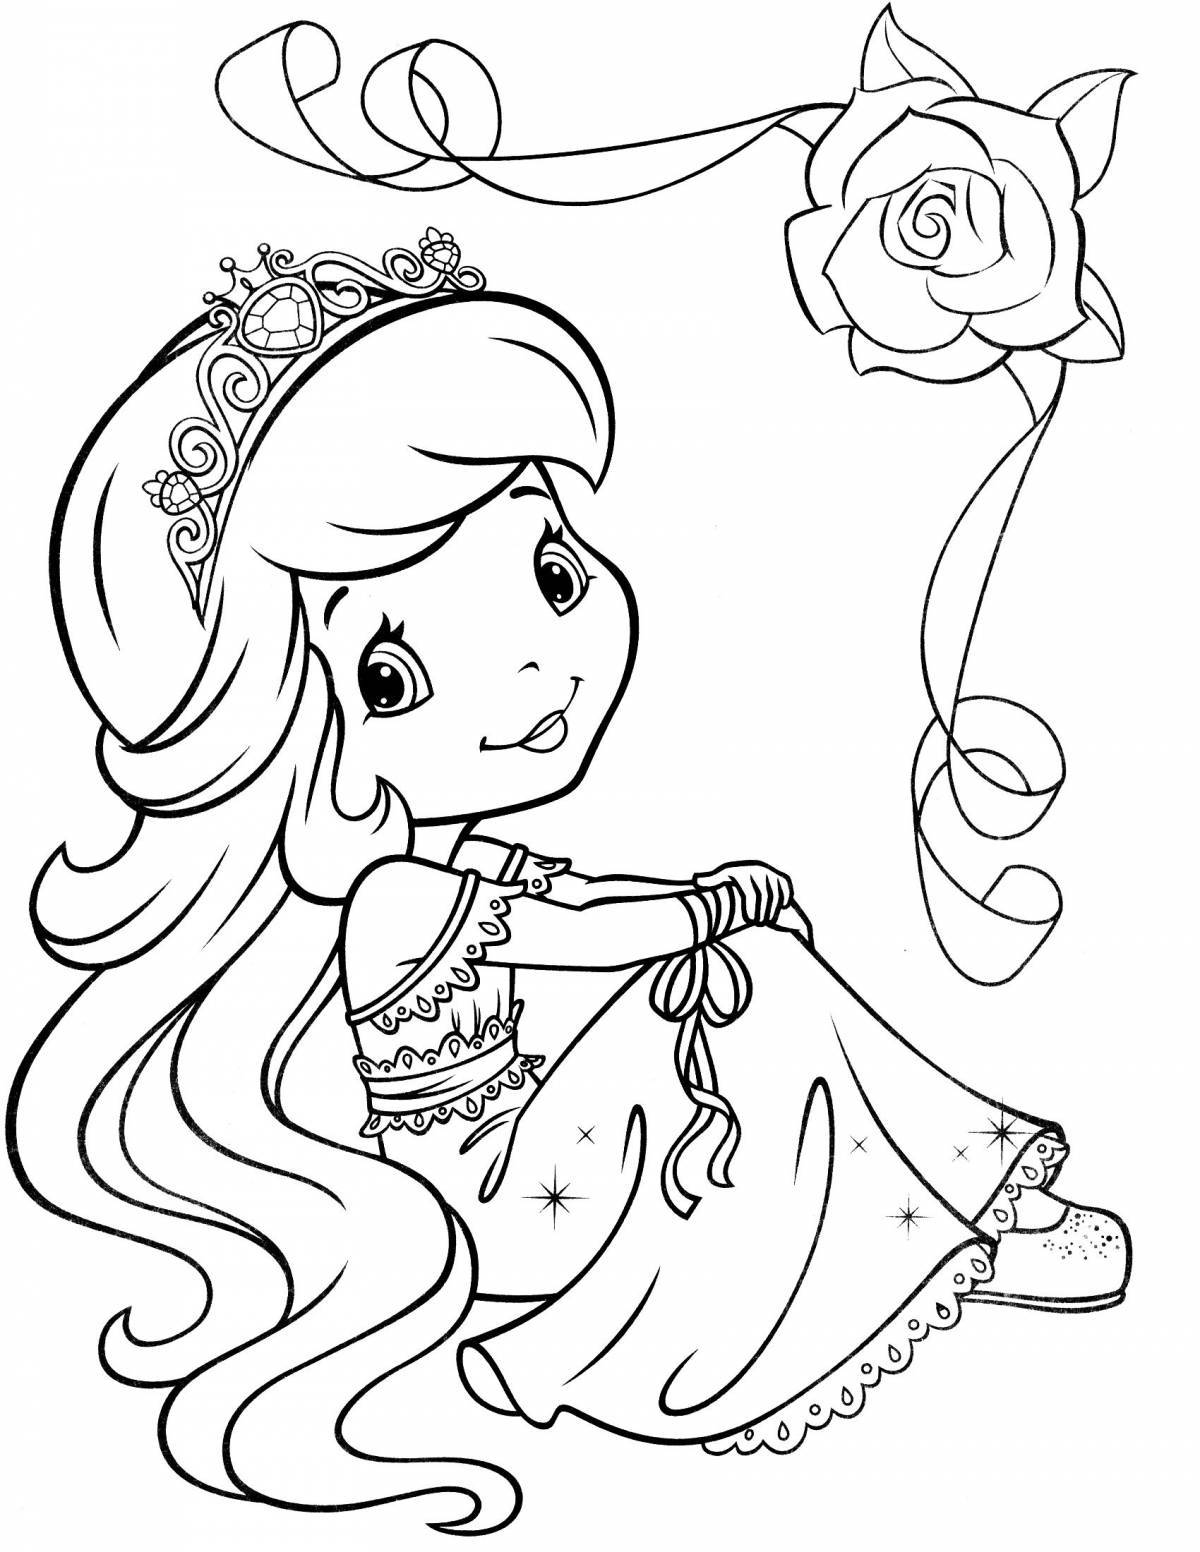 Exquisite princess coloring pages for kids